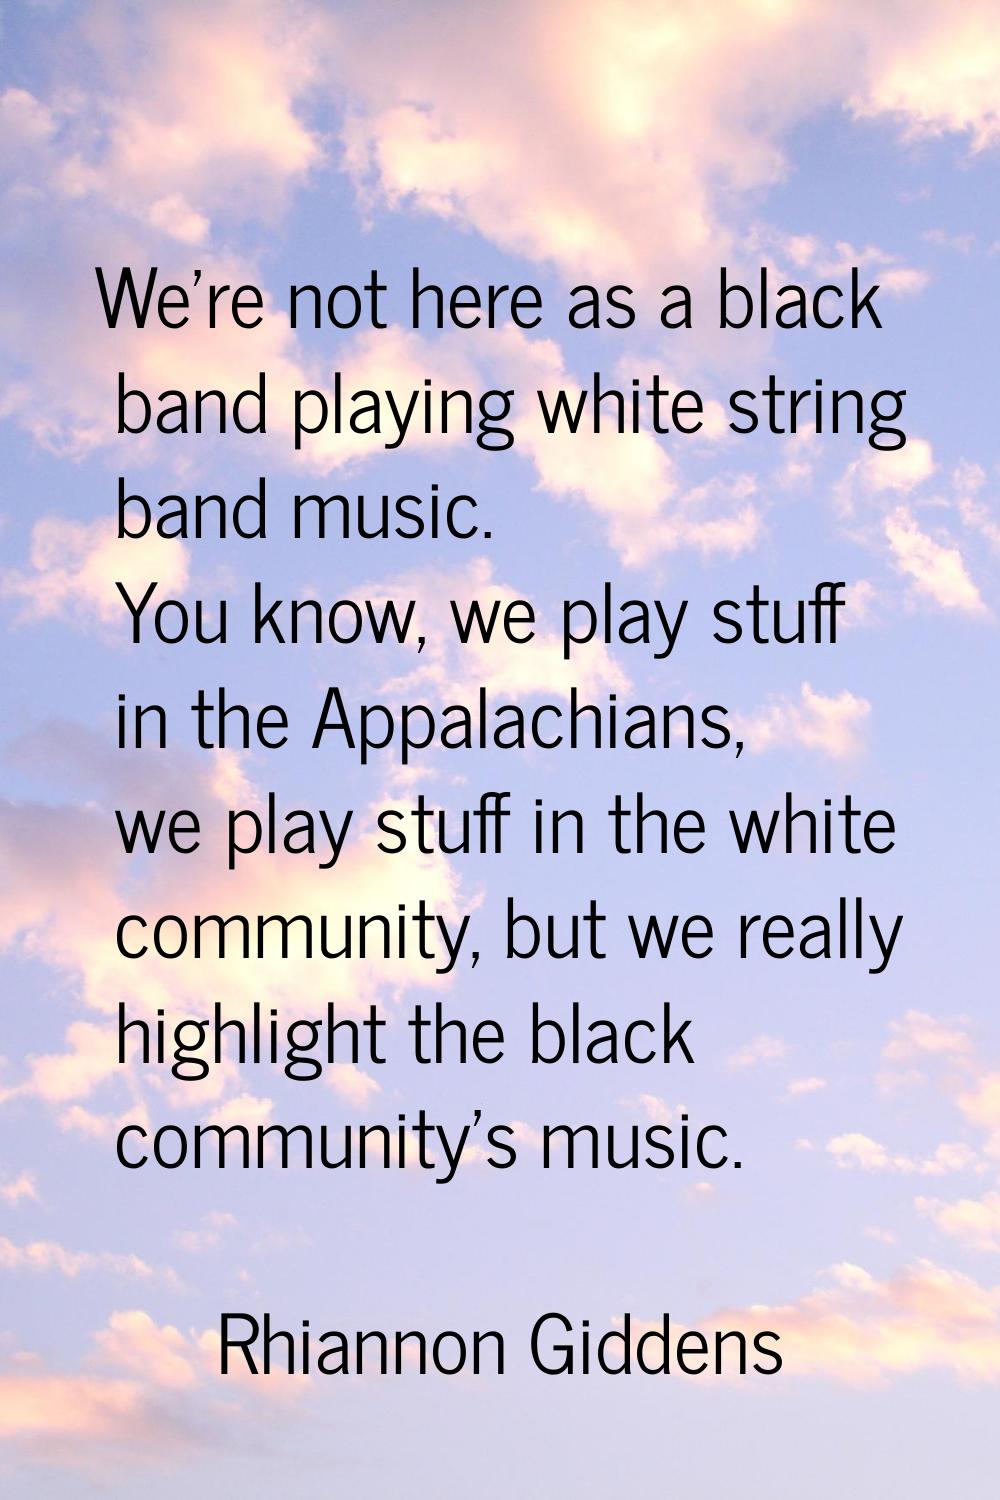 We're not here as a black band playing white string band music. You know, we play stuff in the Appa